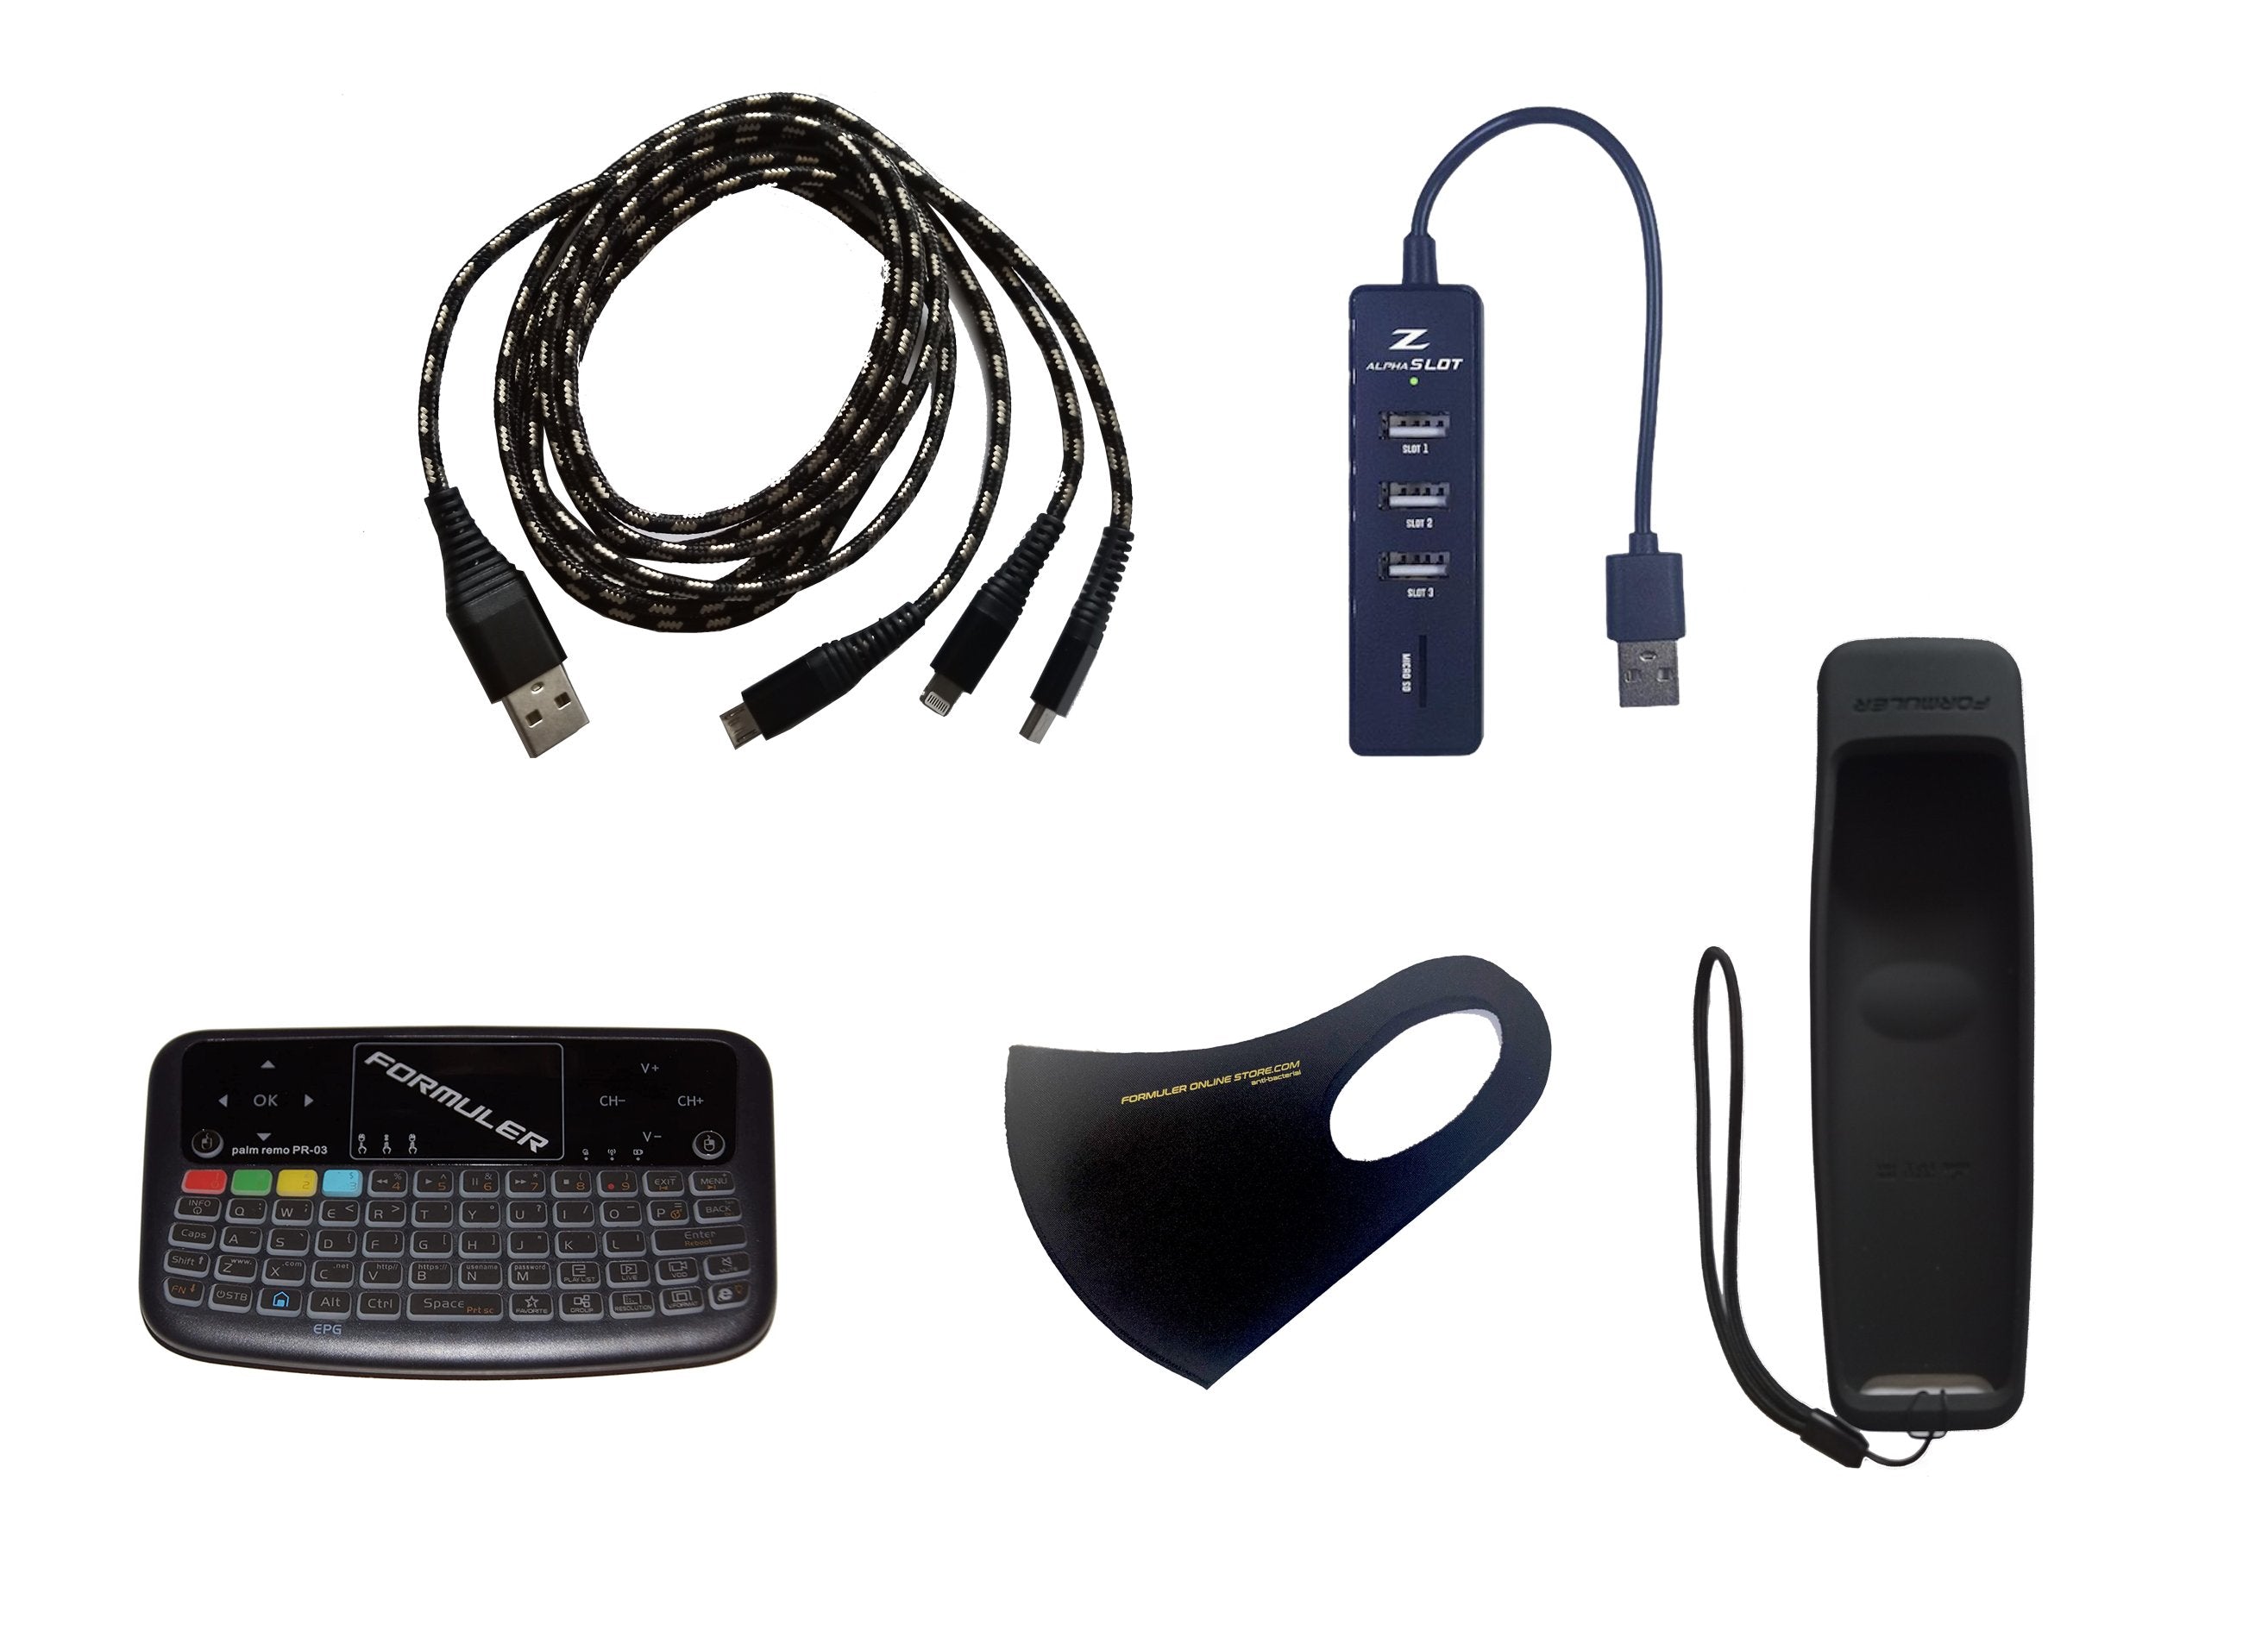 Accessoires bundle included: Wireless Mini keyboard with touchpad + USB Hub + USB 3-1 Cord extension + Black Remote cover + Mask